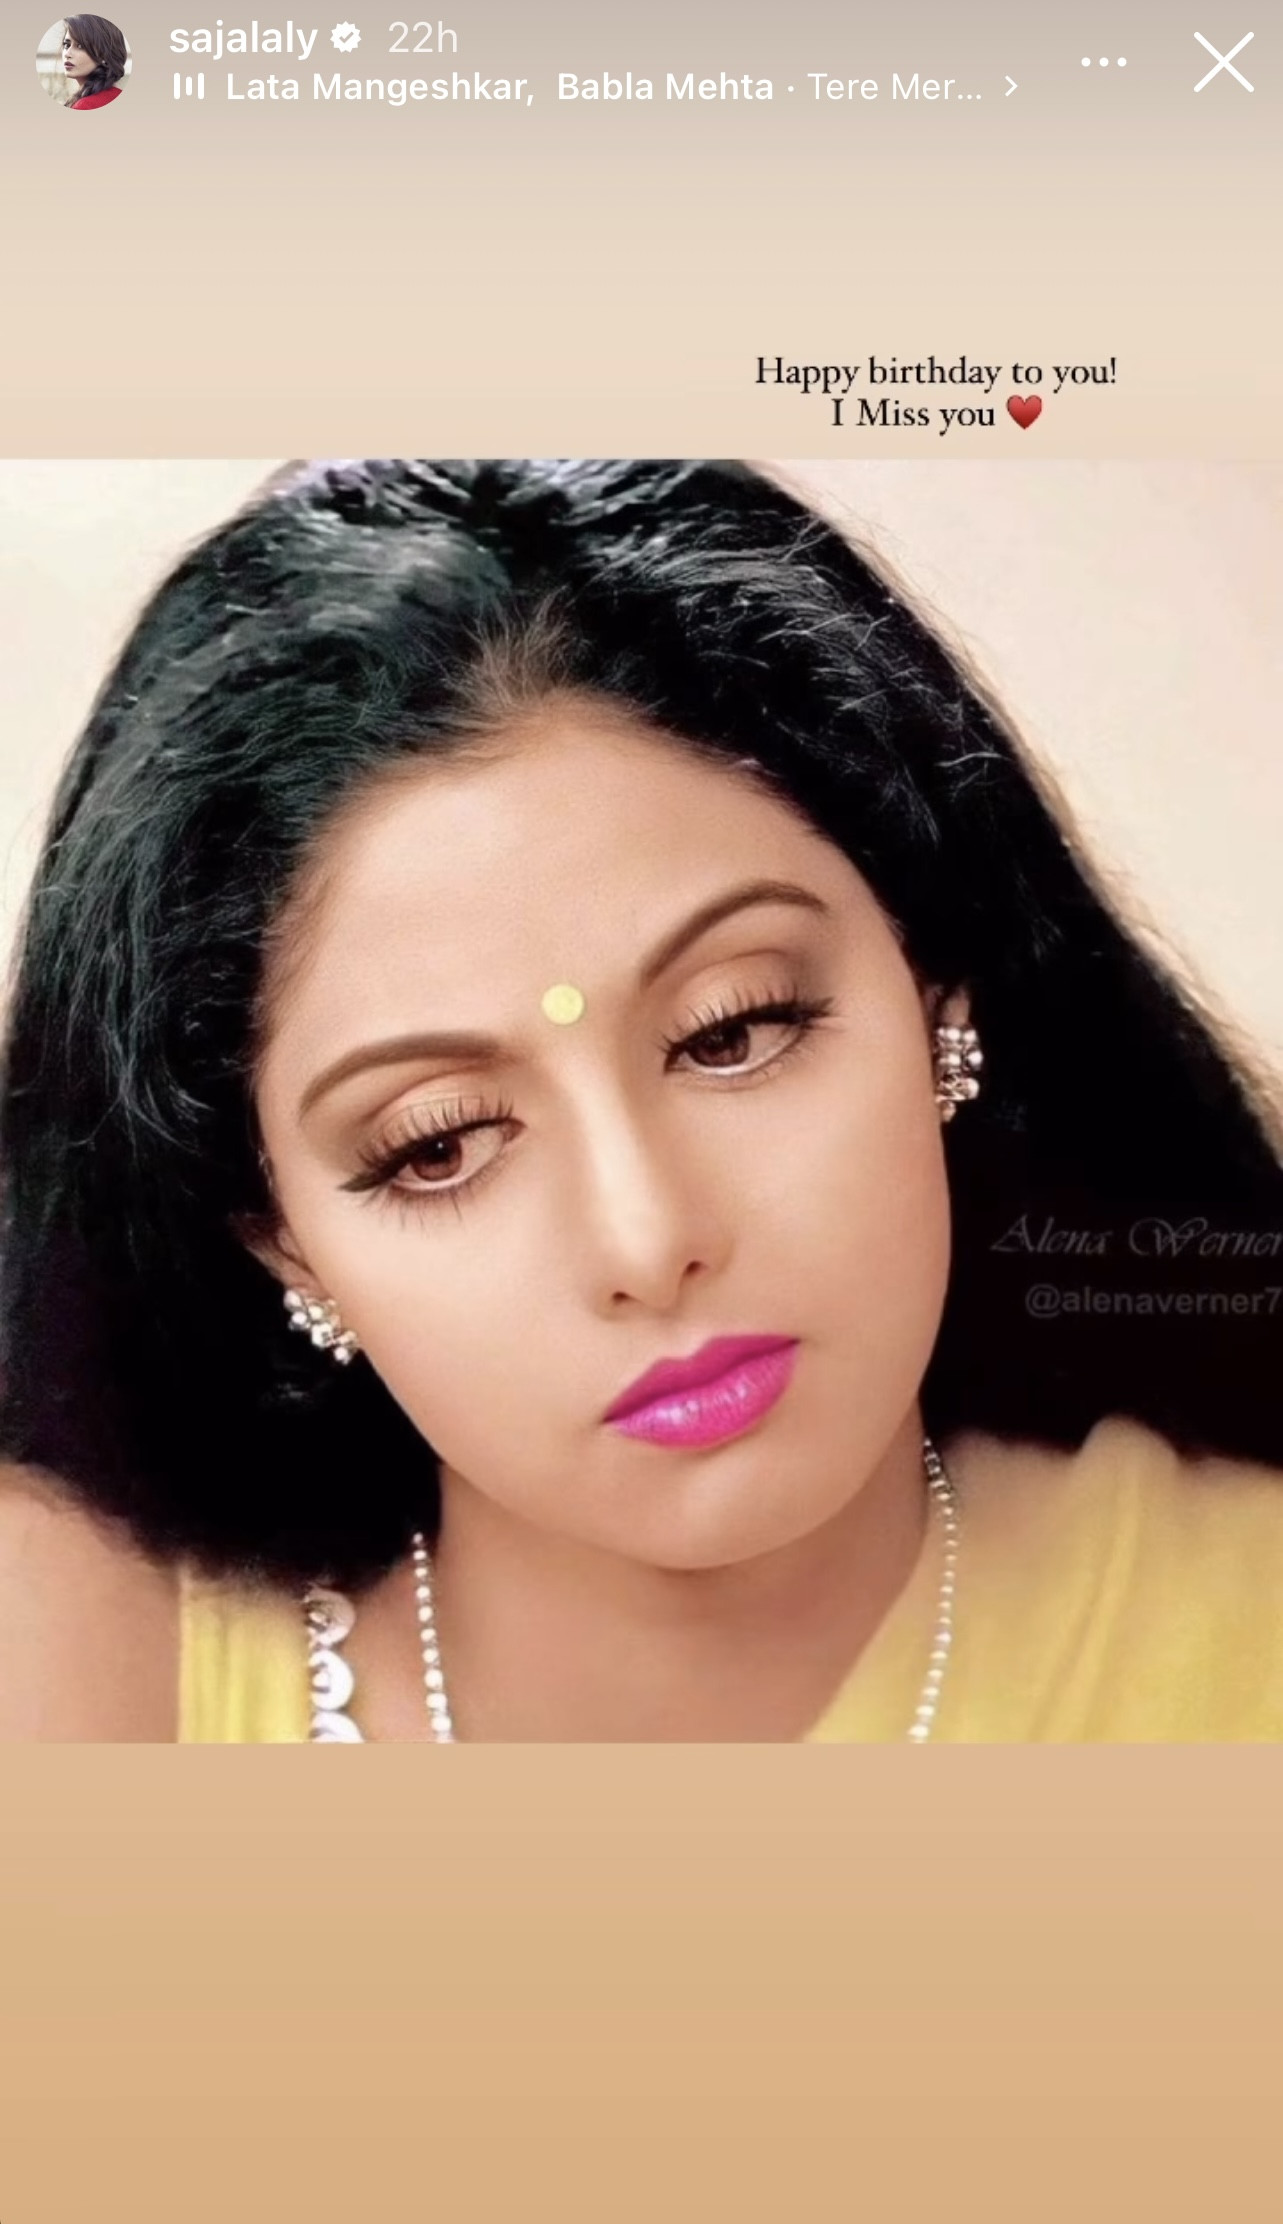 I miss you: Sajal Aly remembers Sri Devi on her 60th birthday